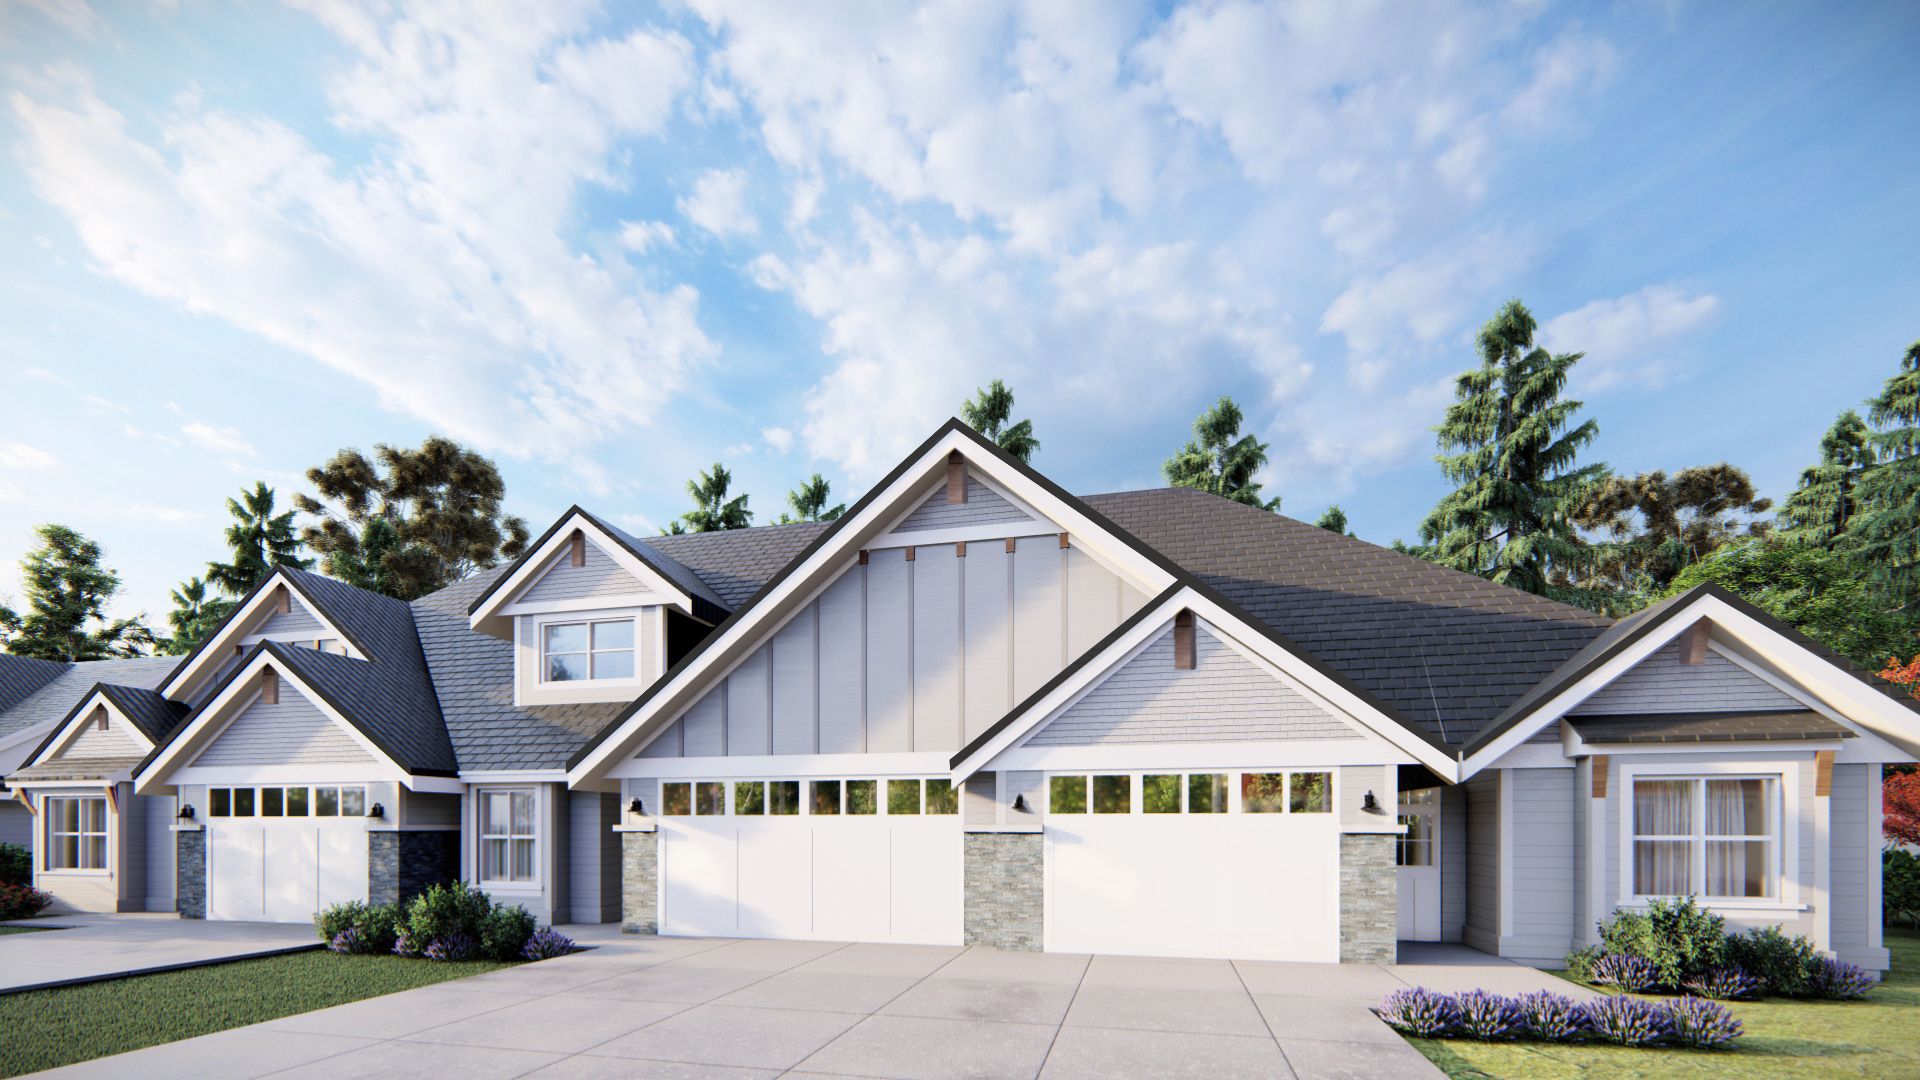 Introducing The Silverstone Patio Home Development in Crown Isle